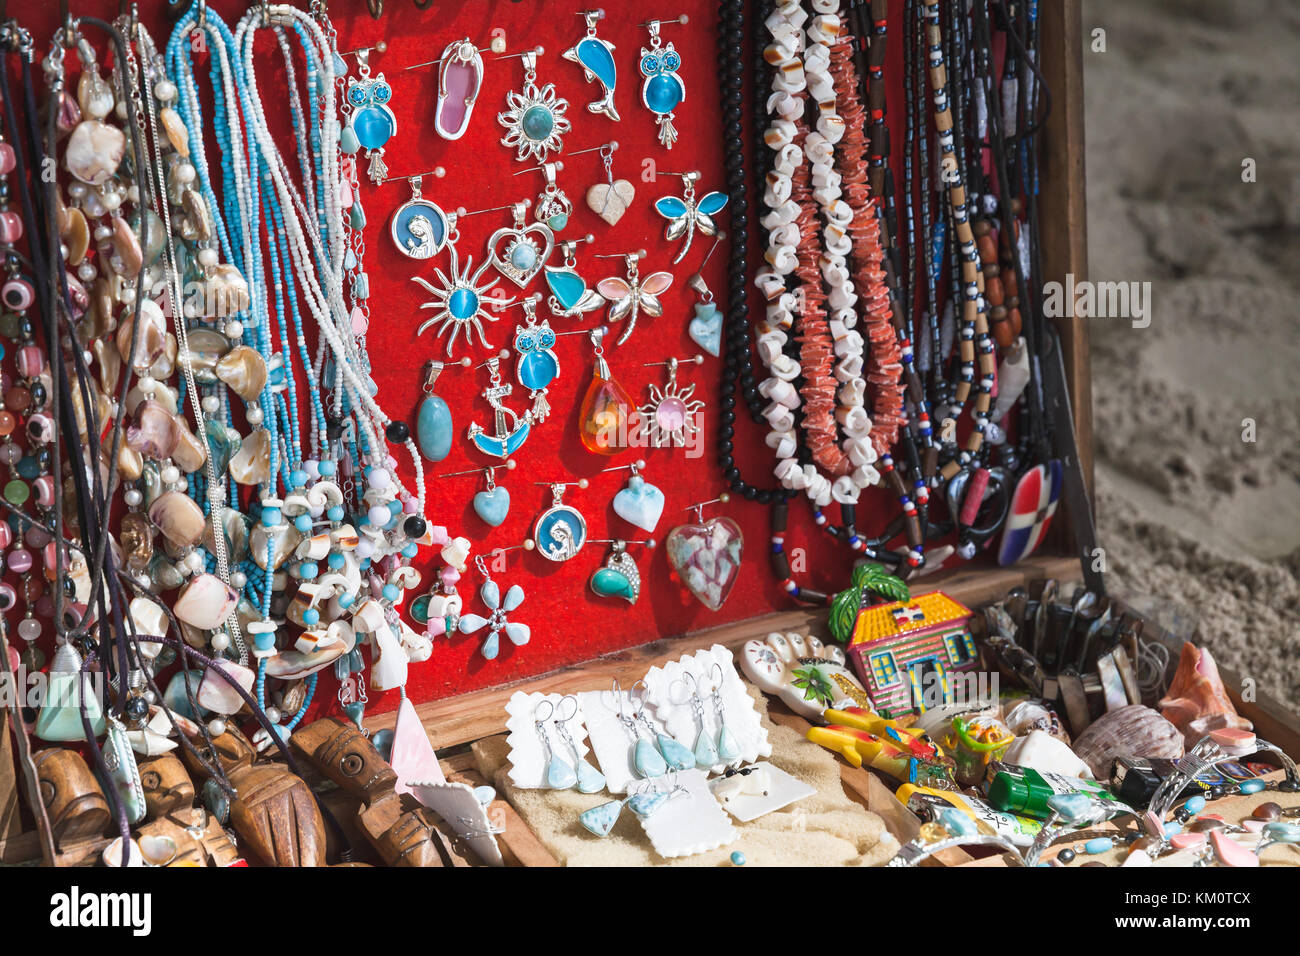 Saona island, Dominican Republic - January 7, 2017: Assortment of traditional Dominican jewelry is on portable counter Stock Photo